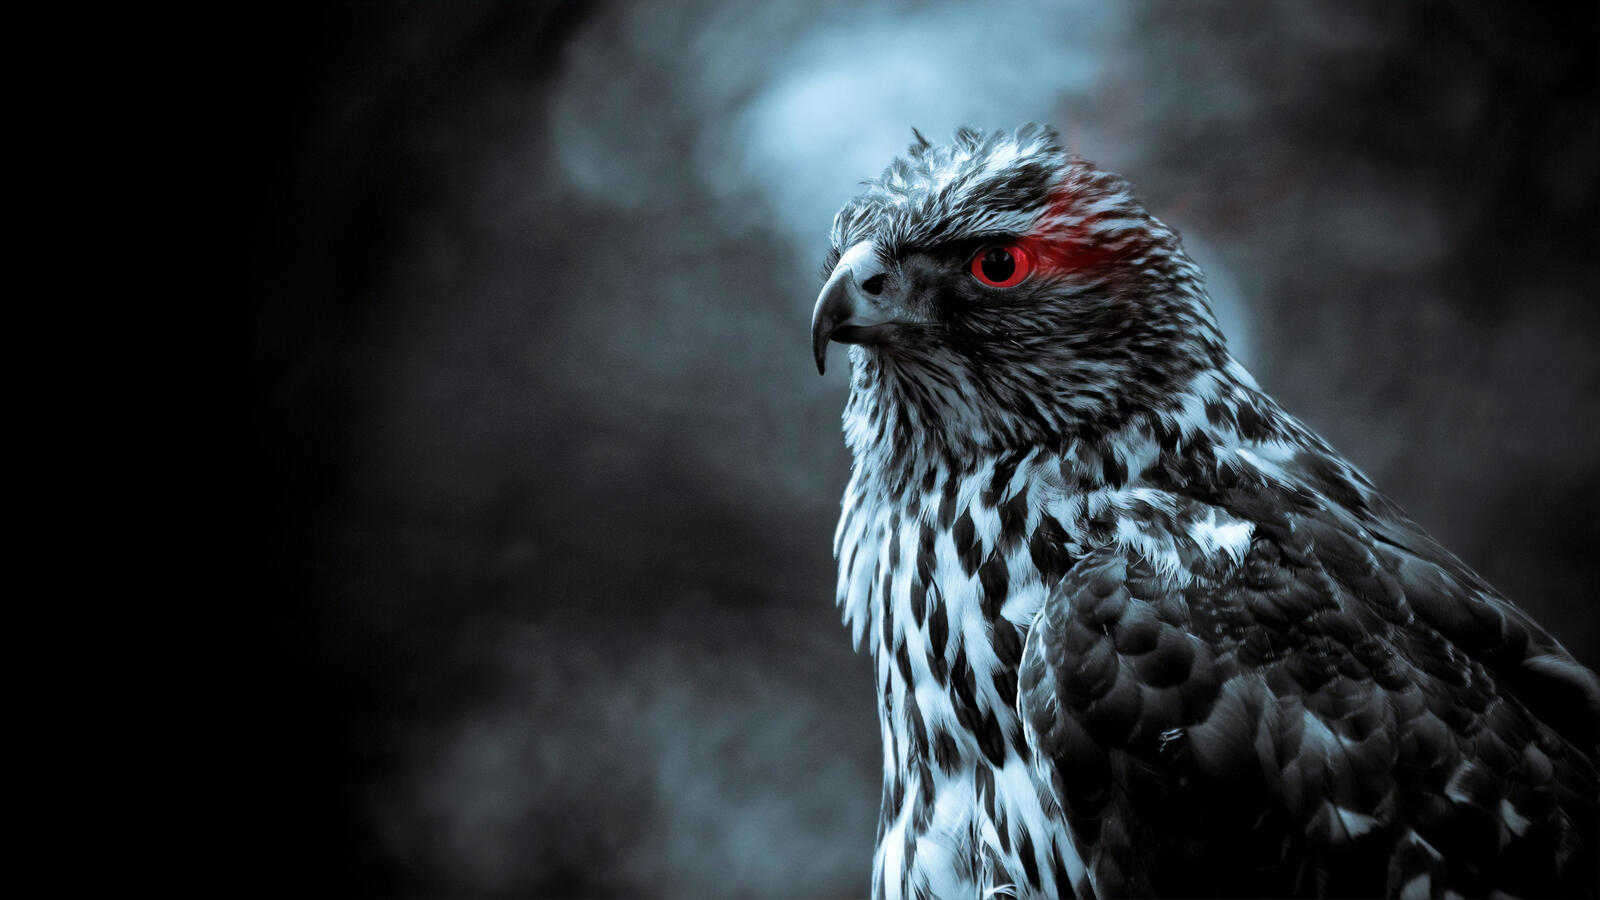 Wallpapers eagle red eyes figure on the desktop